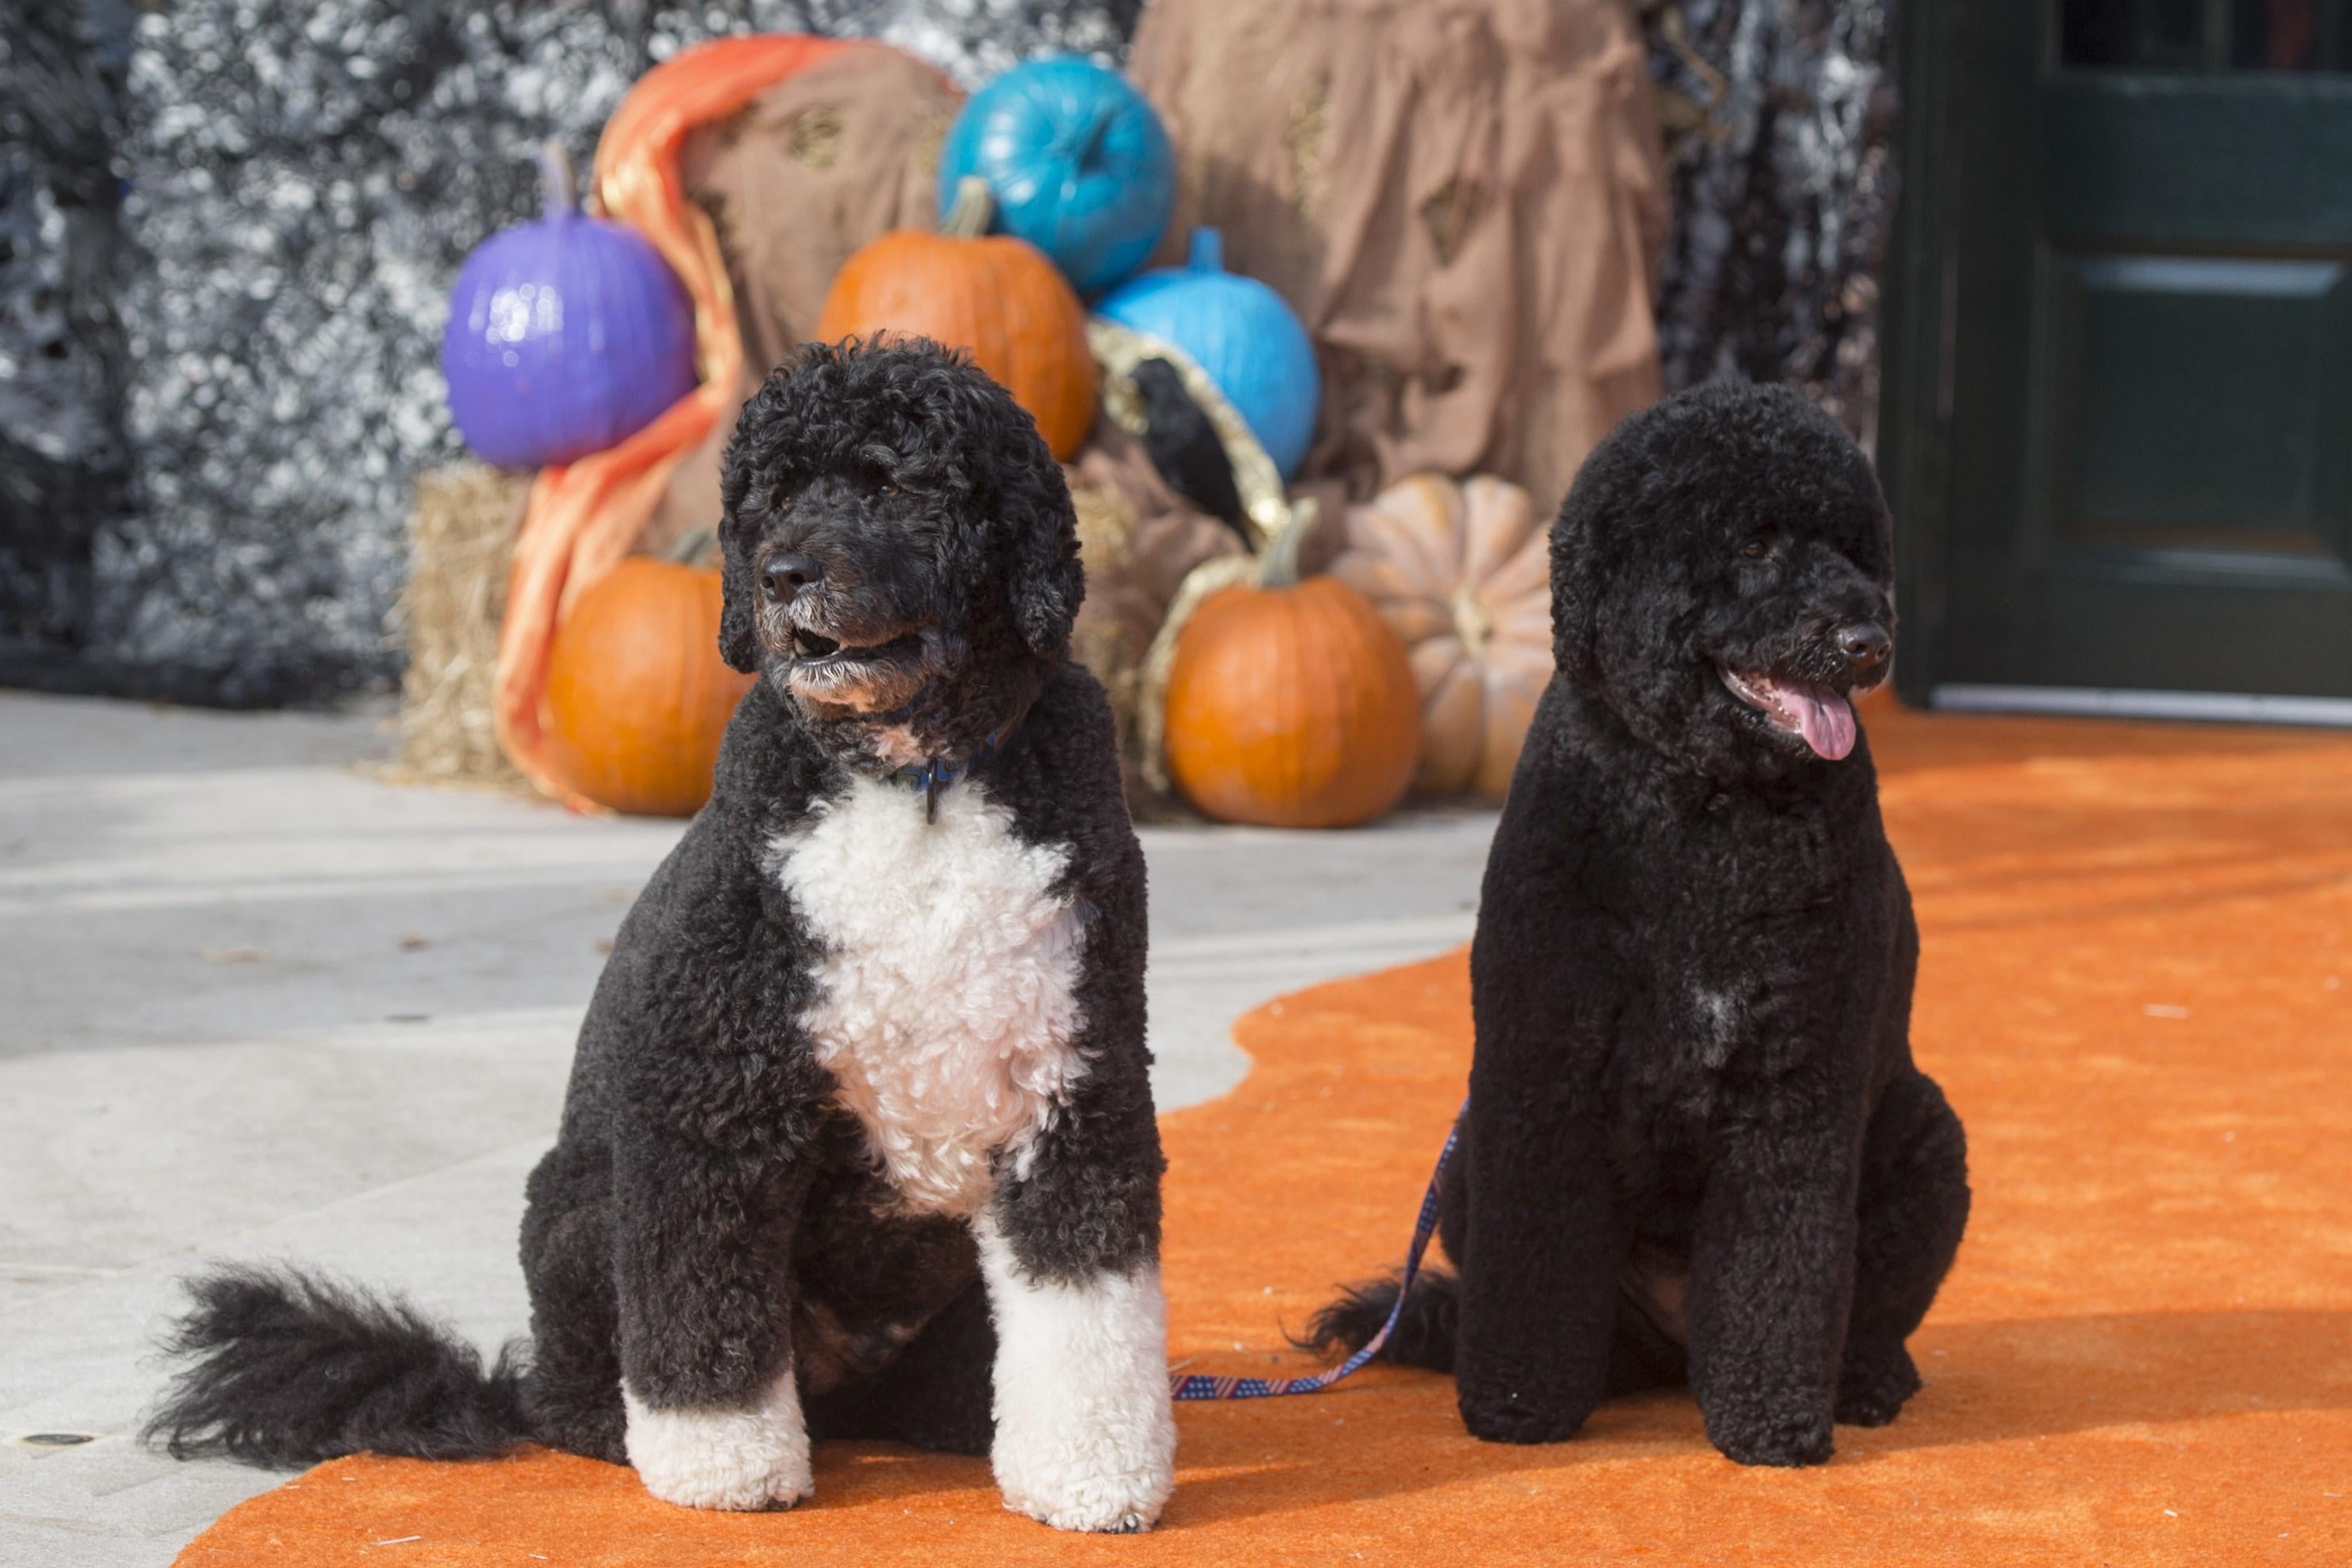 Bo and Sunny pose for photos on the South Lawn of the White House in Washington, D.C. on October 30, 2015, as the White House prepares to host thousands of children and their families as they trick-or-treat for Halloween. 